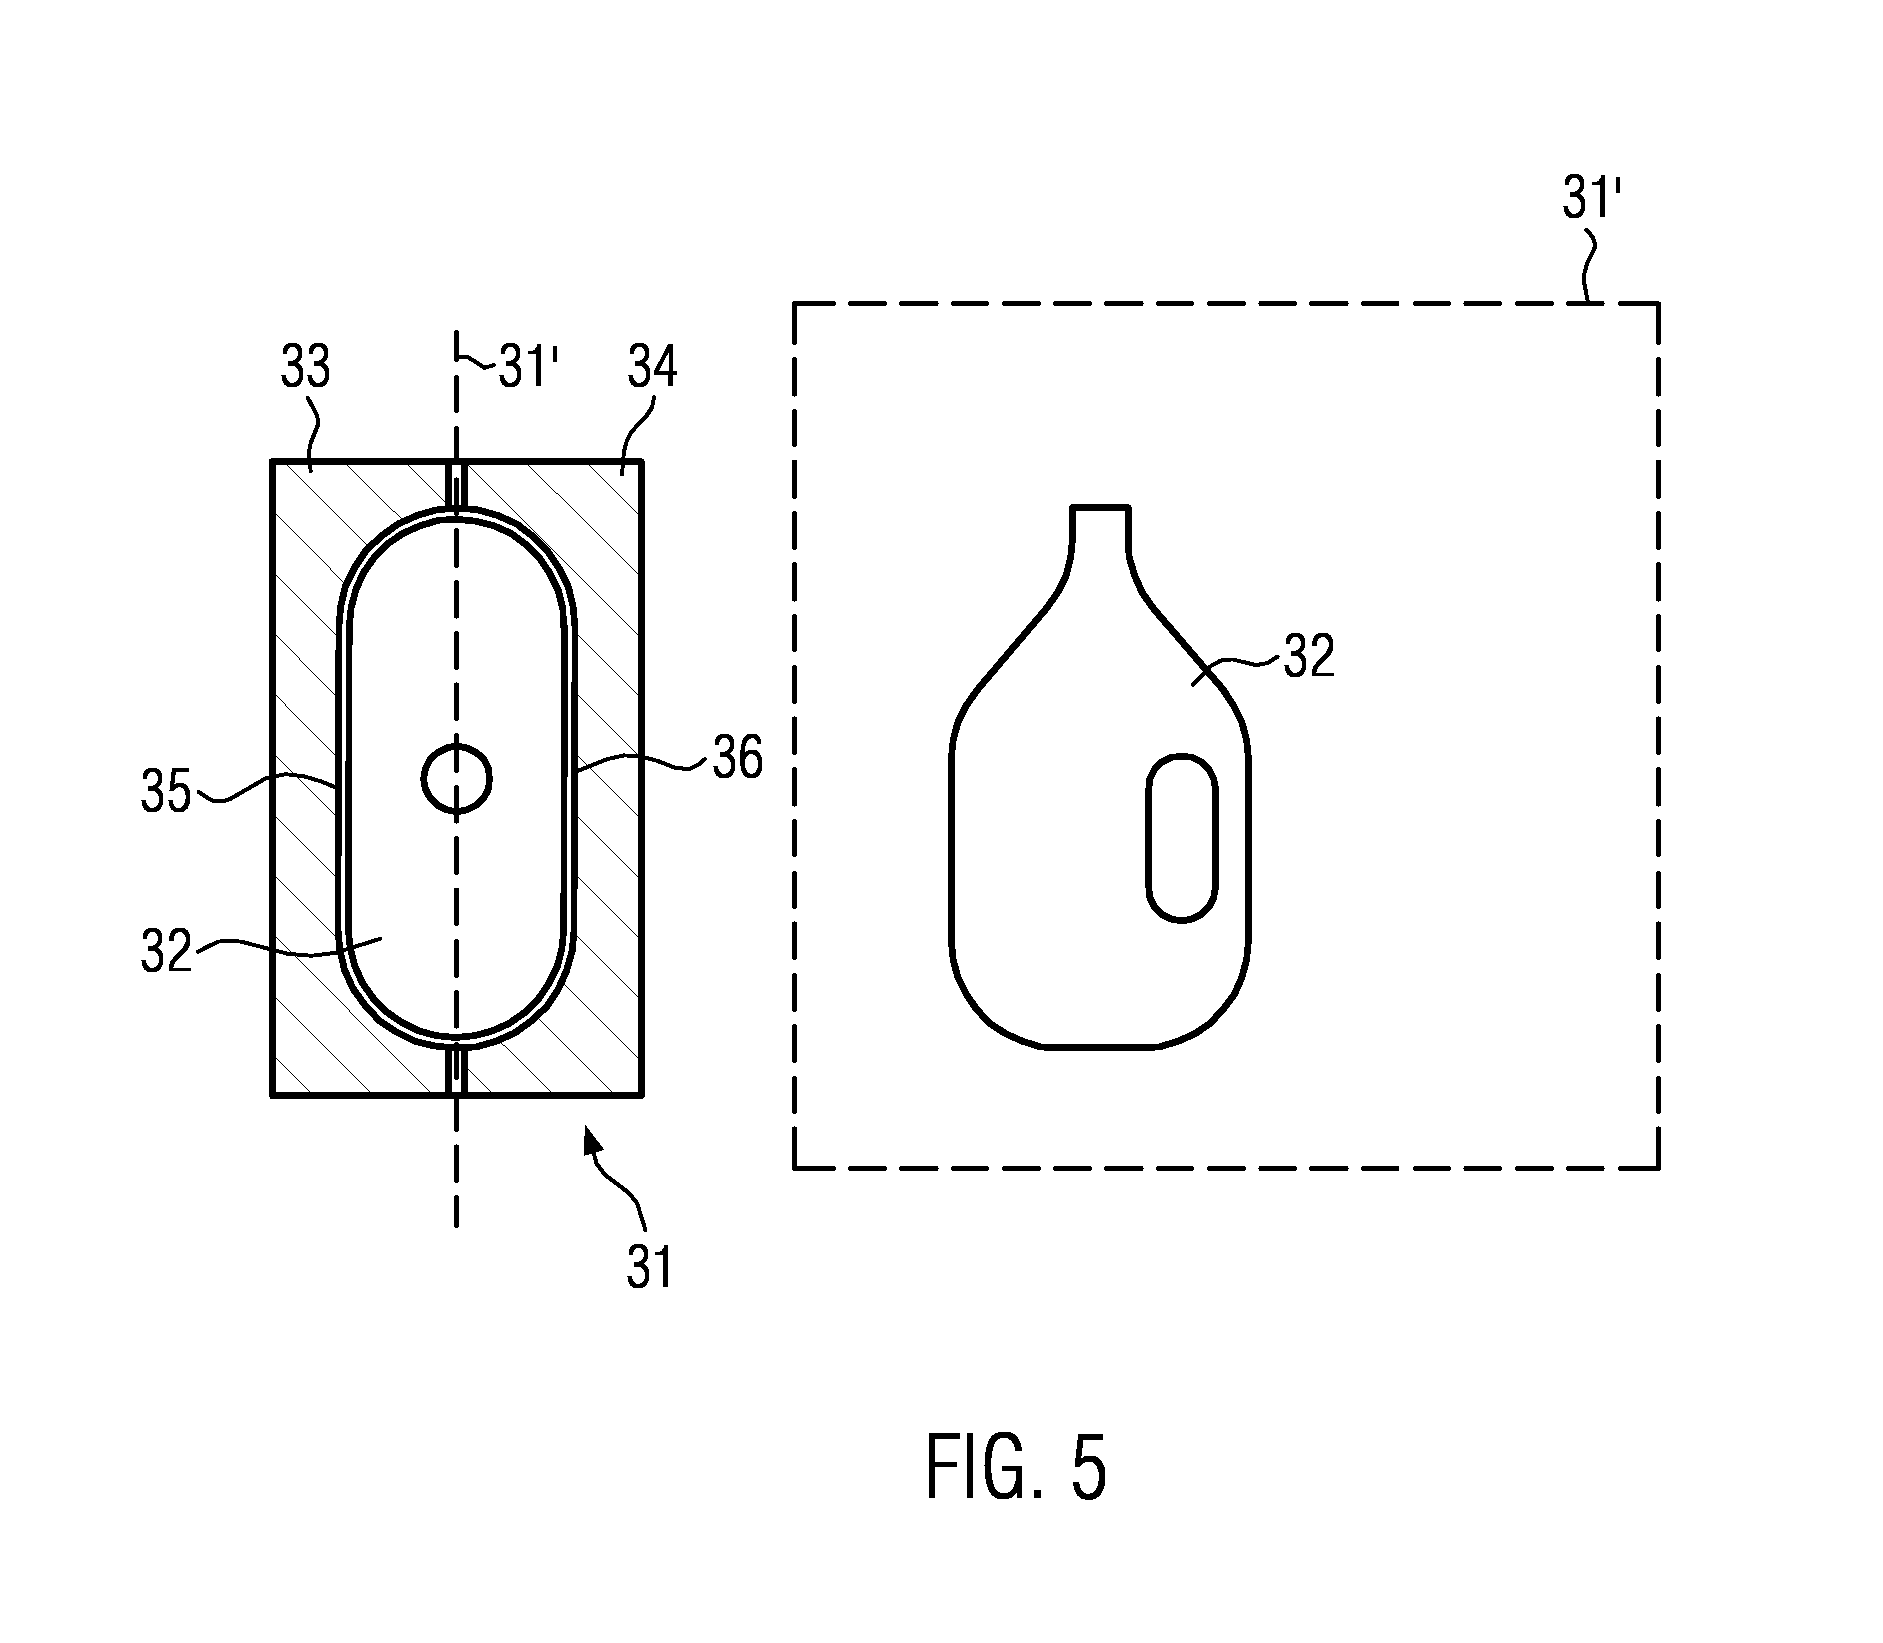 Method for manufacturing blow molds